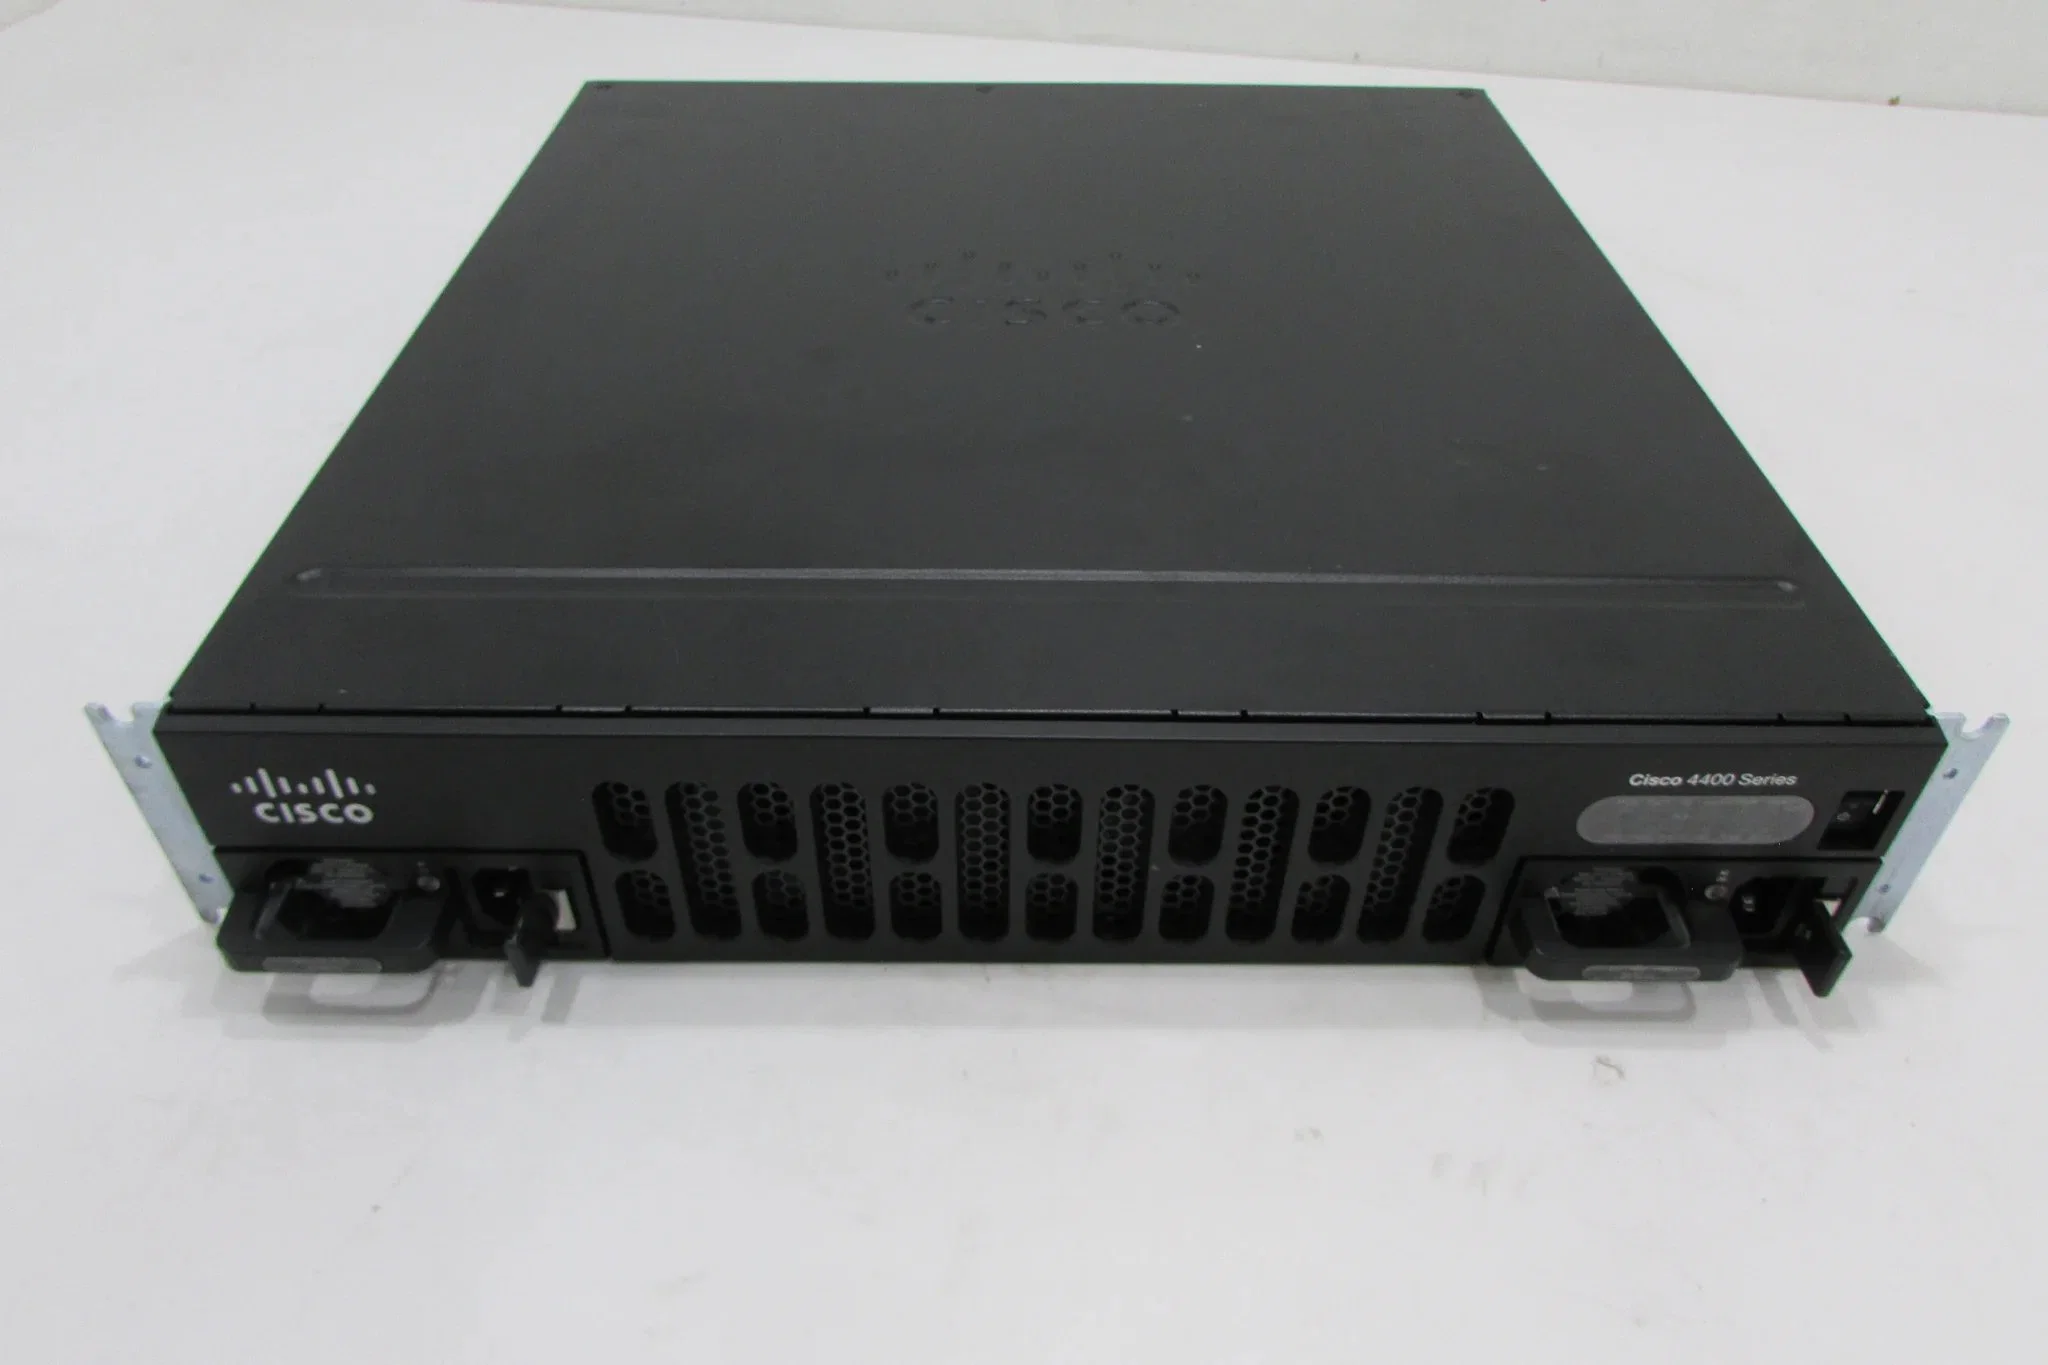 Original New Cisco Router Isr 4451 Integrated Services Router Isr4451-X/K9